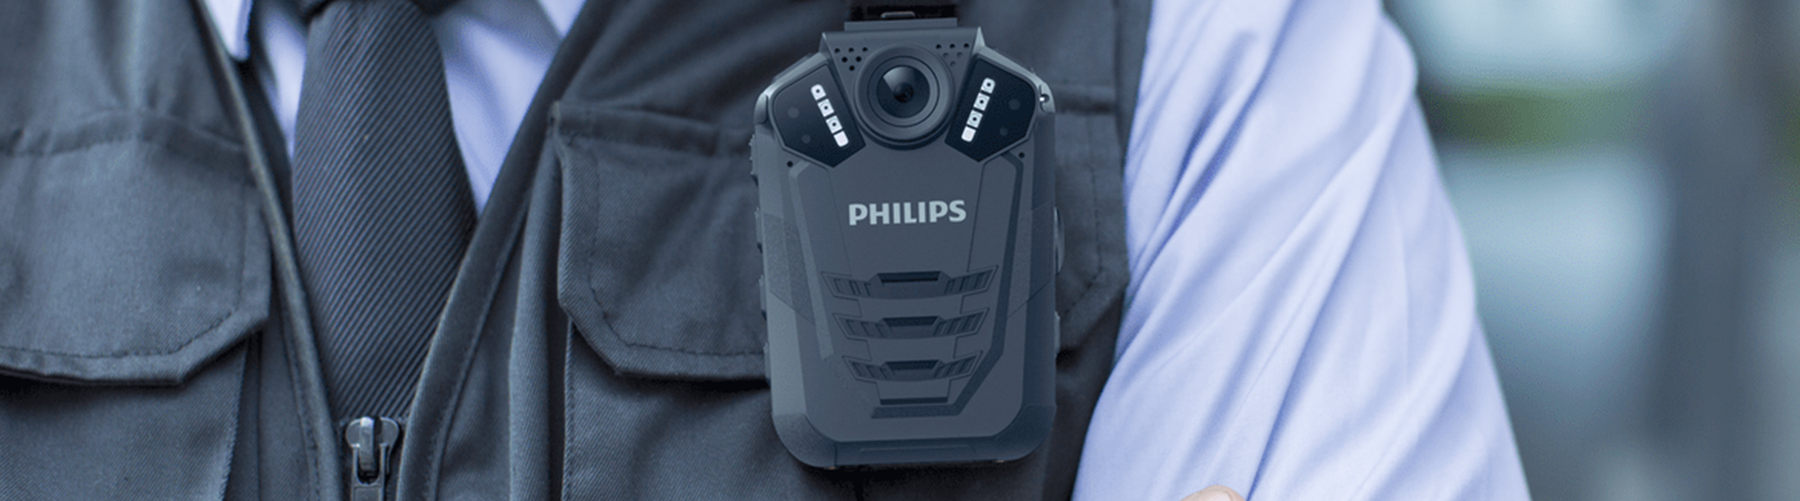 How to use the GPS Tagging Feature with the Philips DVT3120 Body Camera